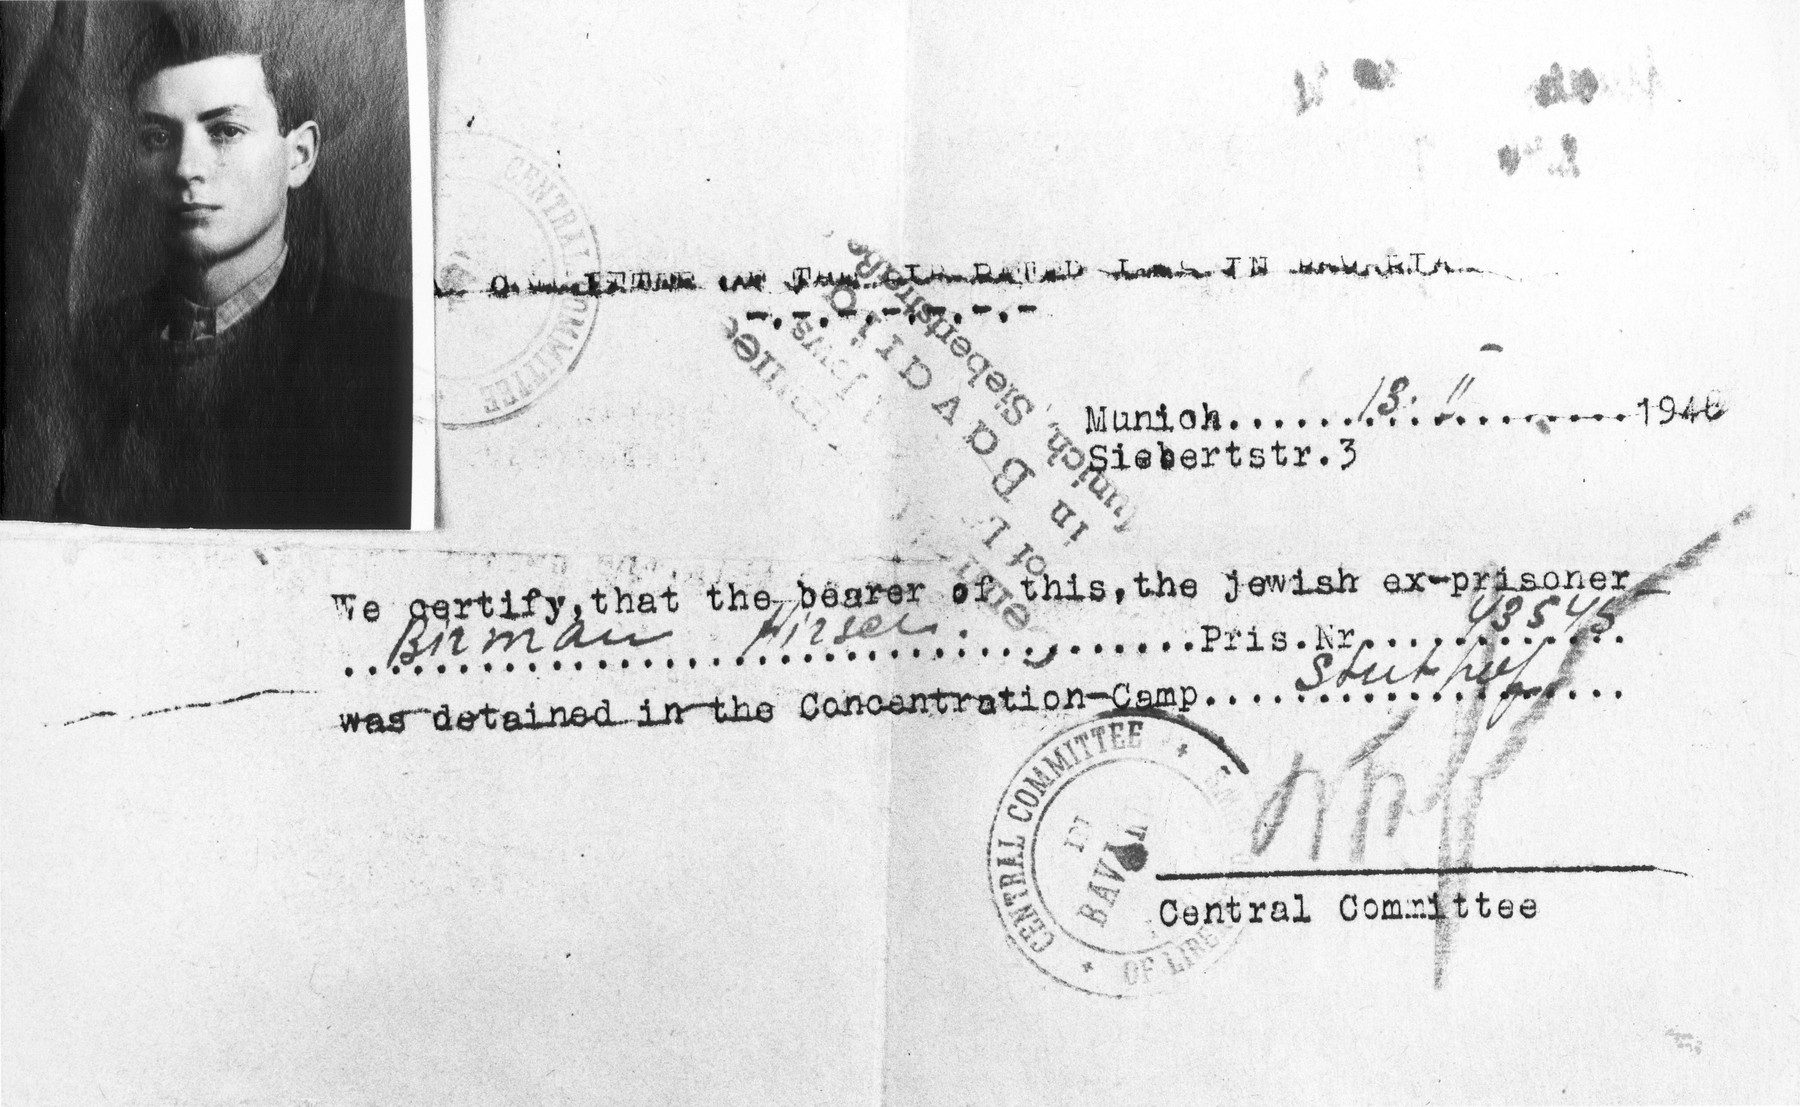 Identification papers issued to Hirsch Birman by the Central Committee for Liberated Jews in Bavaria attesting to the fact that he had been a prisoner at the Stutthof concentration camp.